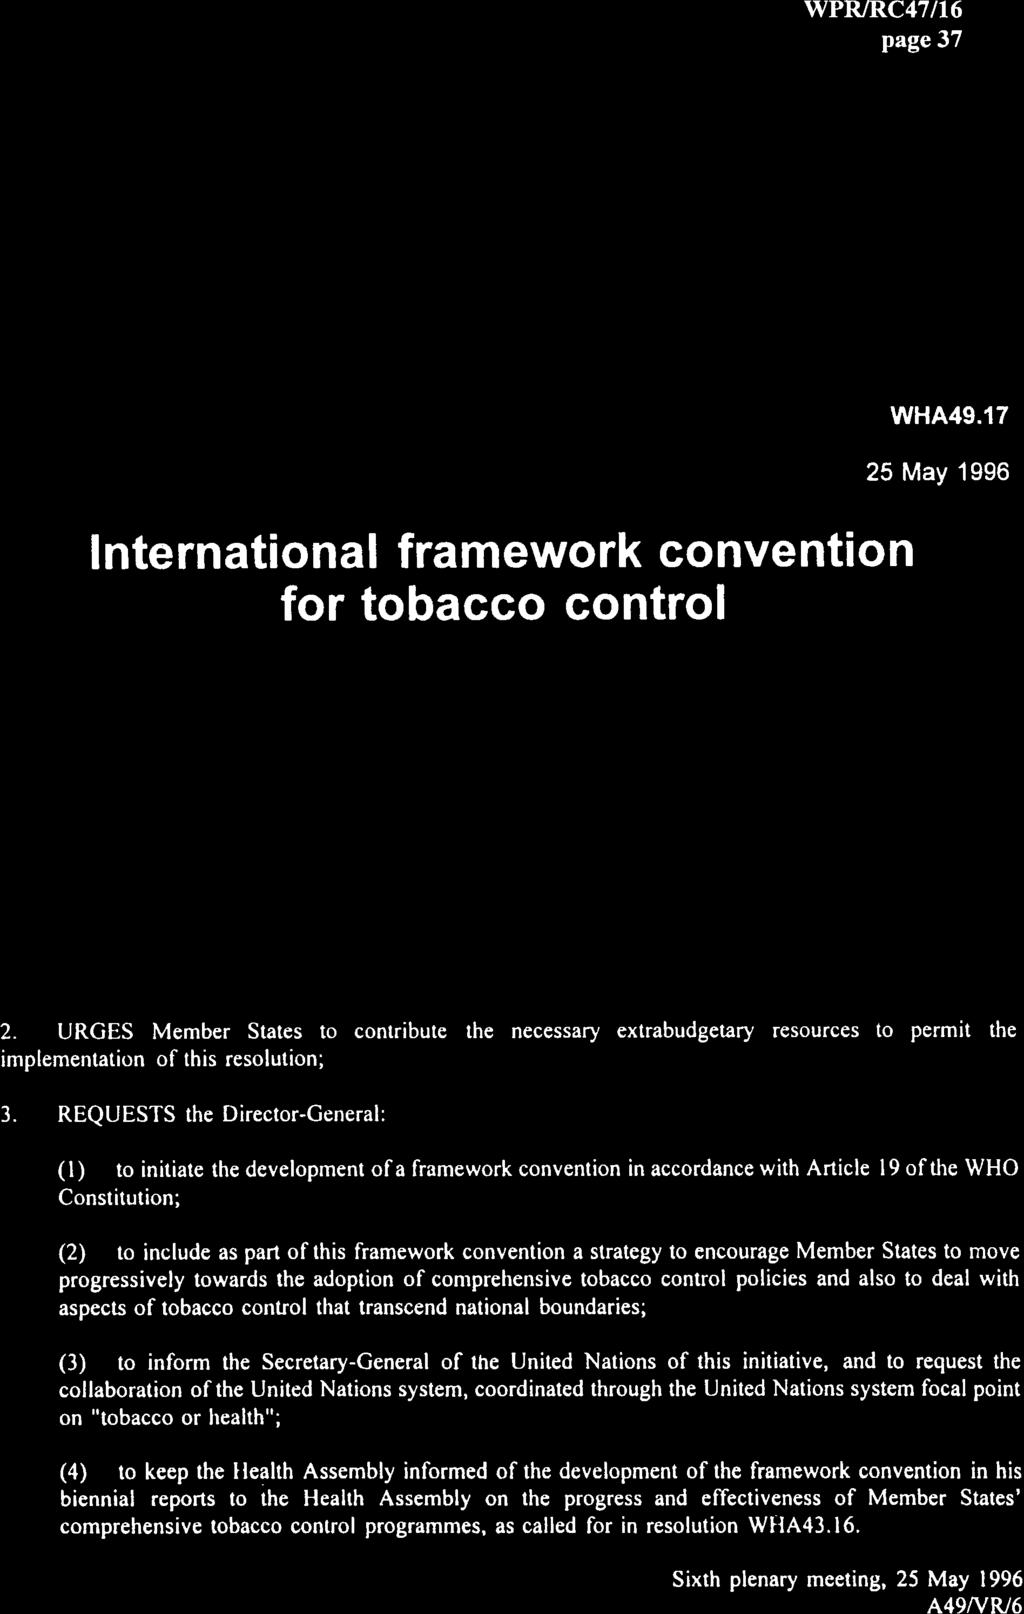 page 37 FORTY-NINTH WORLD HEALTH ASSEMBLY Agenda item 17 WHA49.17 25 May 1996 International framework convention for tobacco control The Forty-ninth World Health Assembly, Recalling resolutions WHA29.